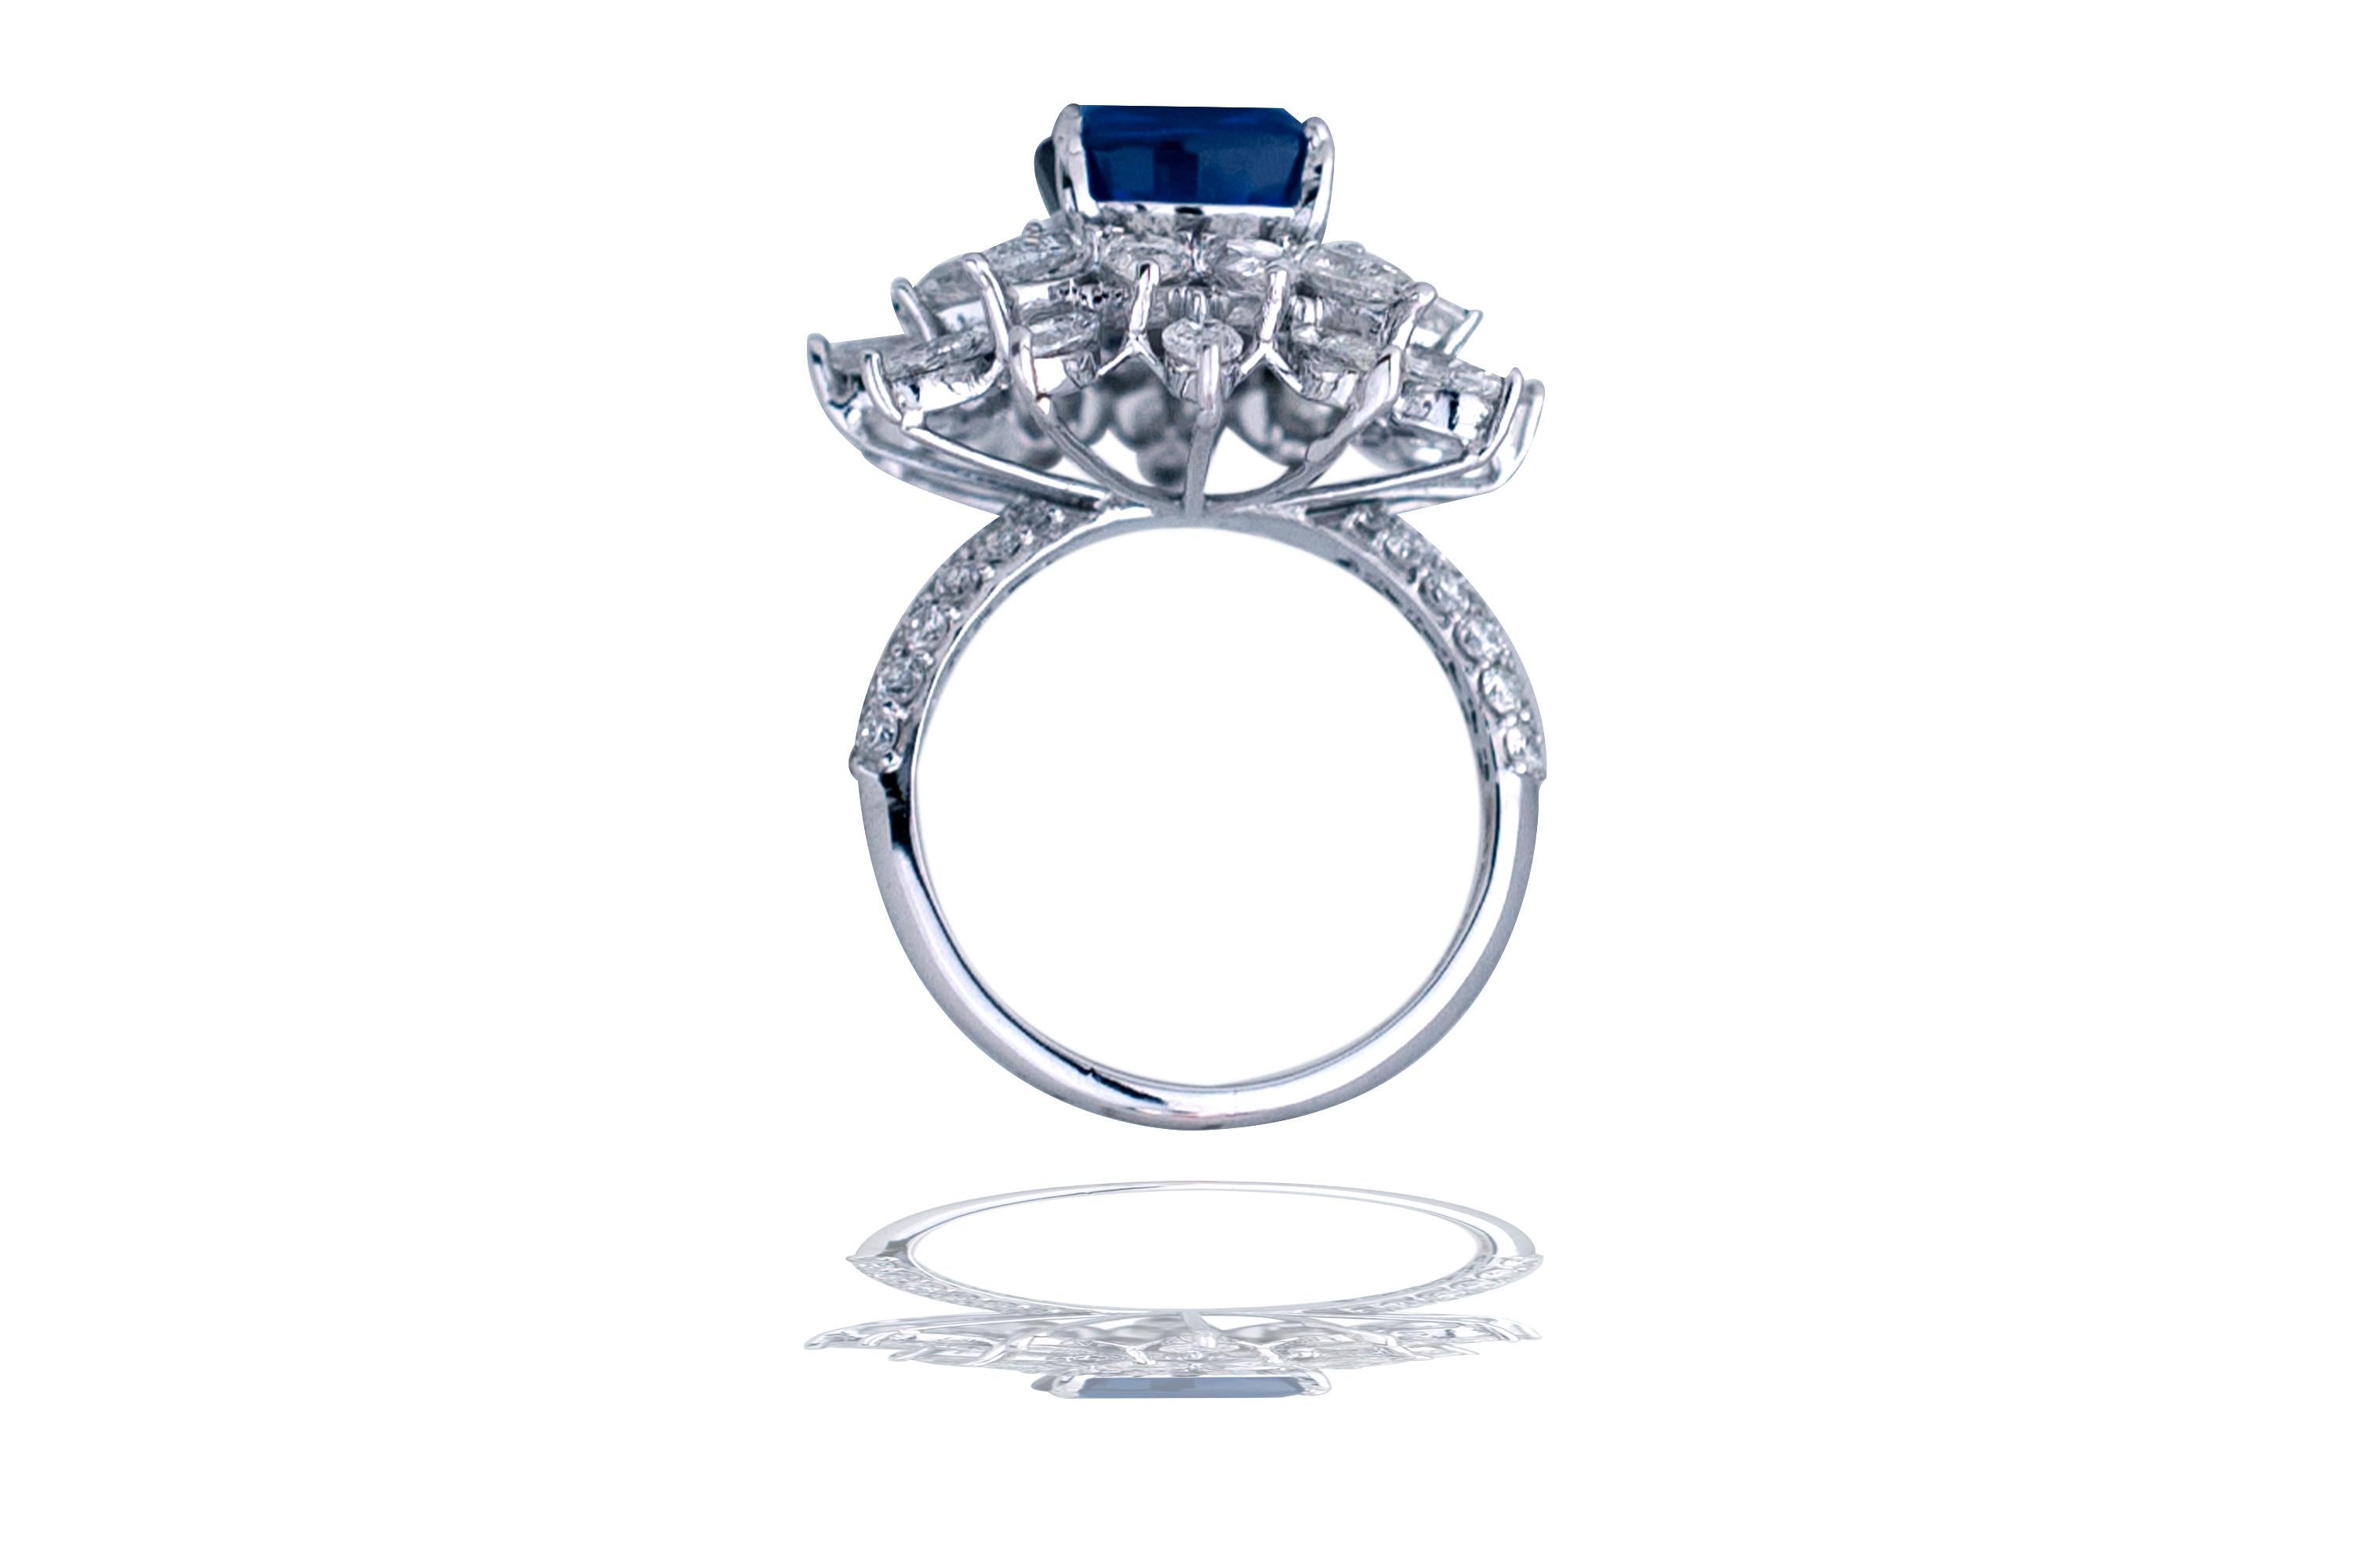 What a ring!  This stunner has a 10 x 10 mm appx. cushion cut sapphire set in the center .  The center stone is rich in blue color and has decent clarity.  The stone is surrounded by two rows of stunning white pear and marquise cut diamonds.  The